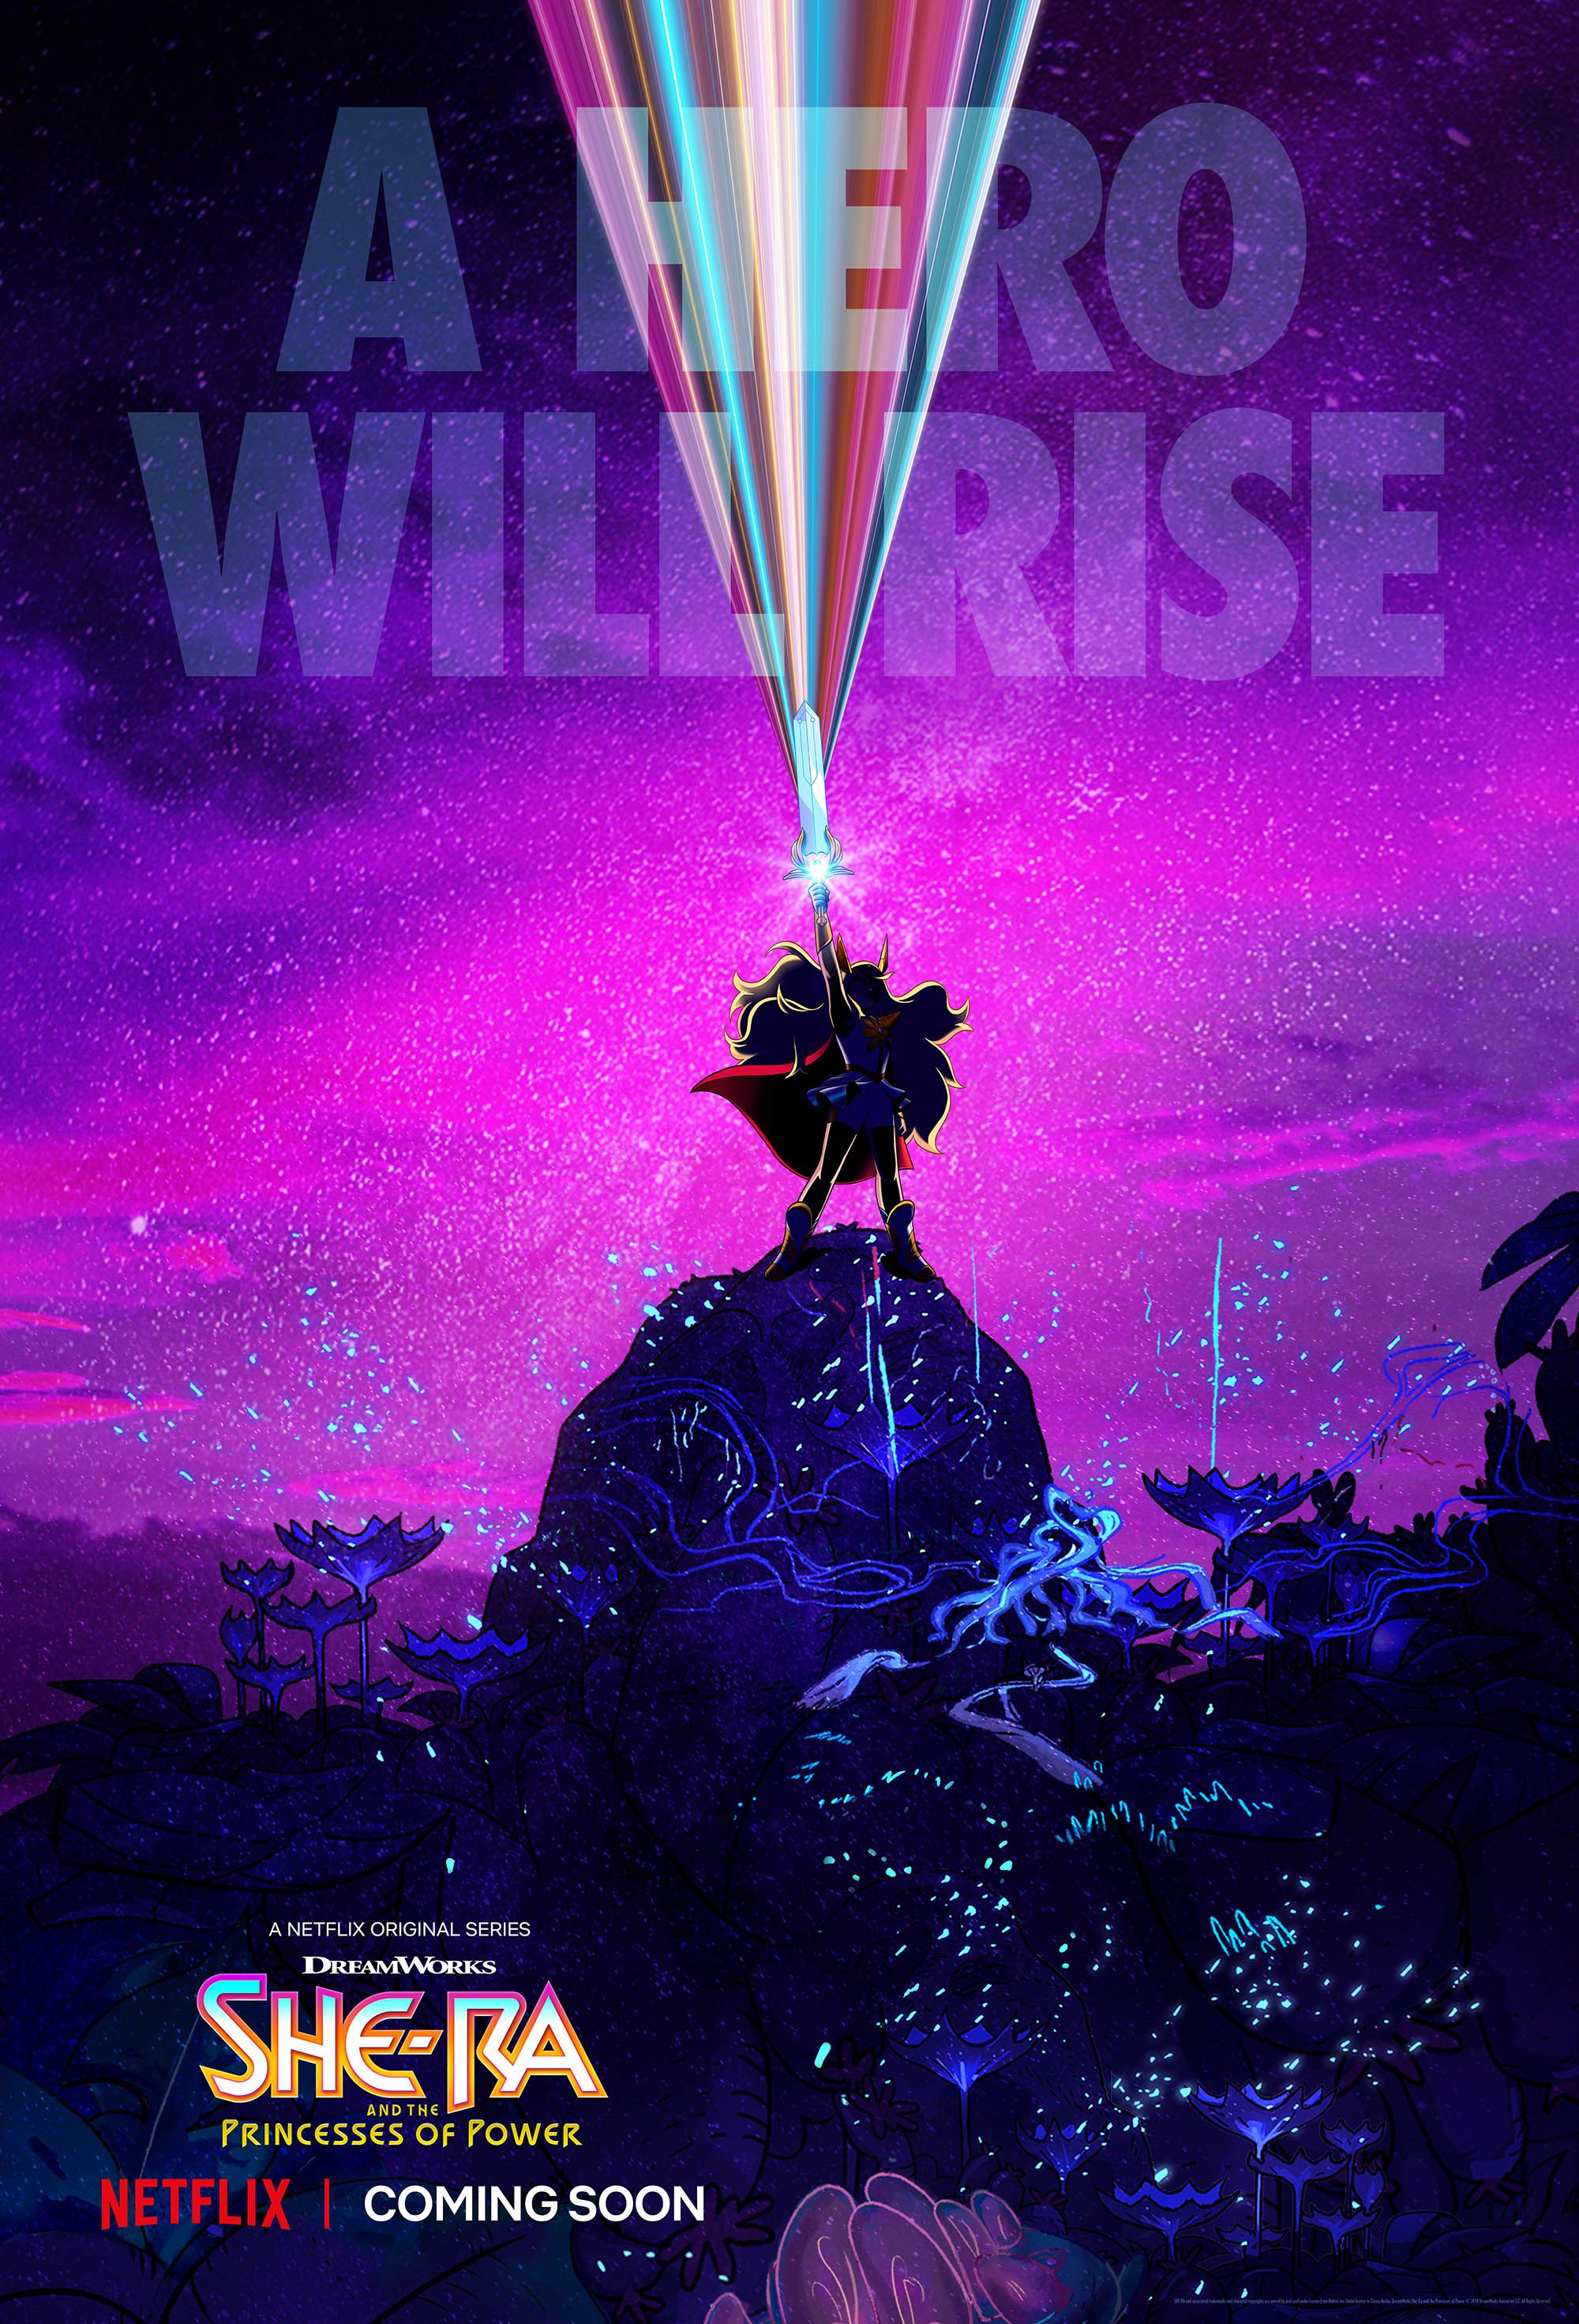 Netflix's She-Ra Series Cast and First-Look Image Revealed | Collider